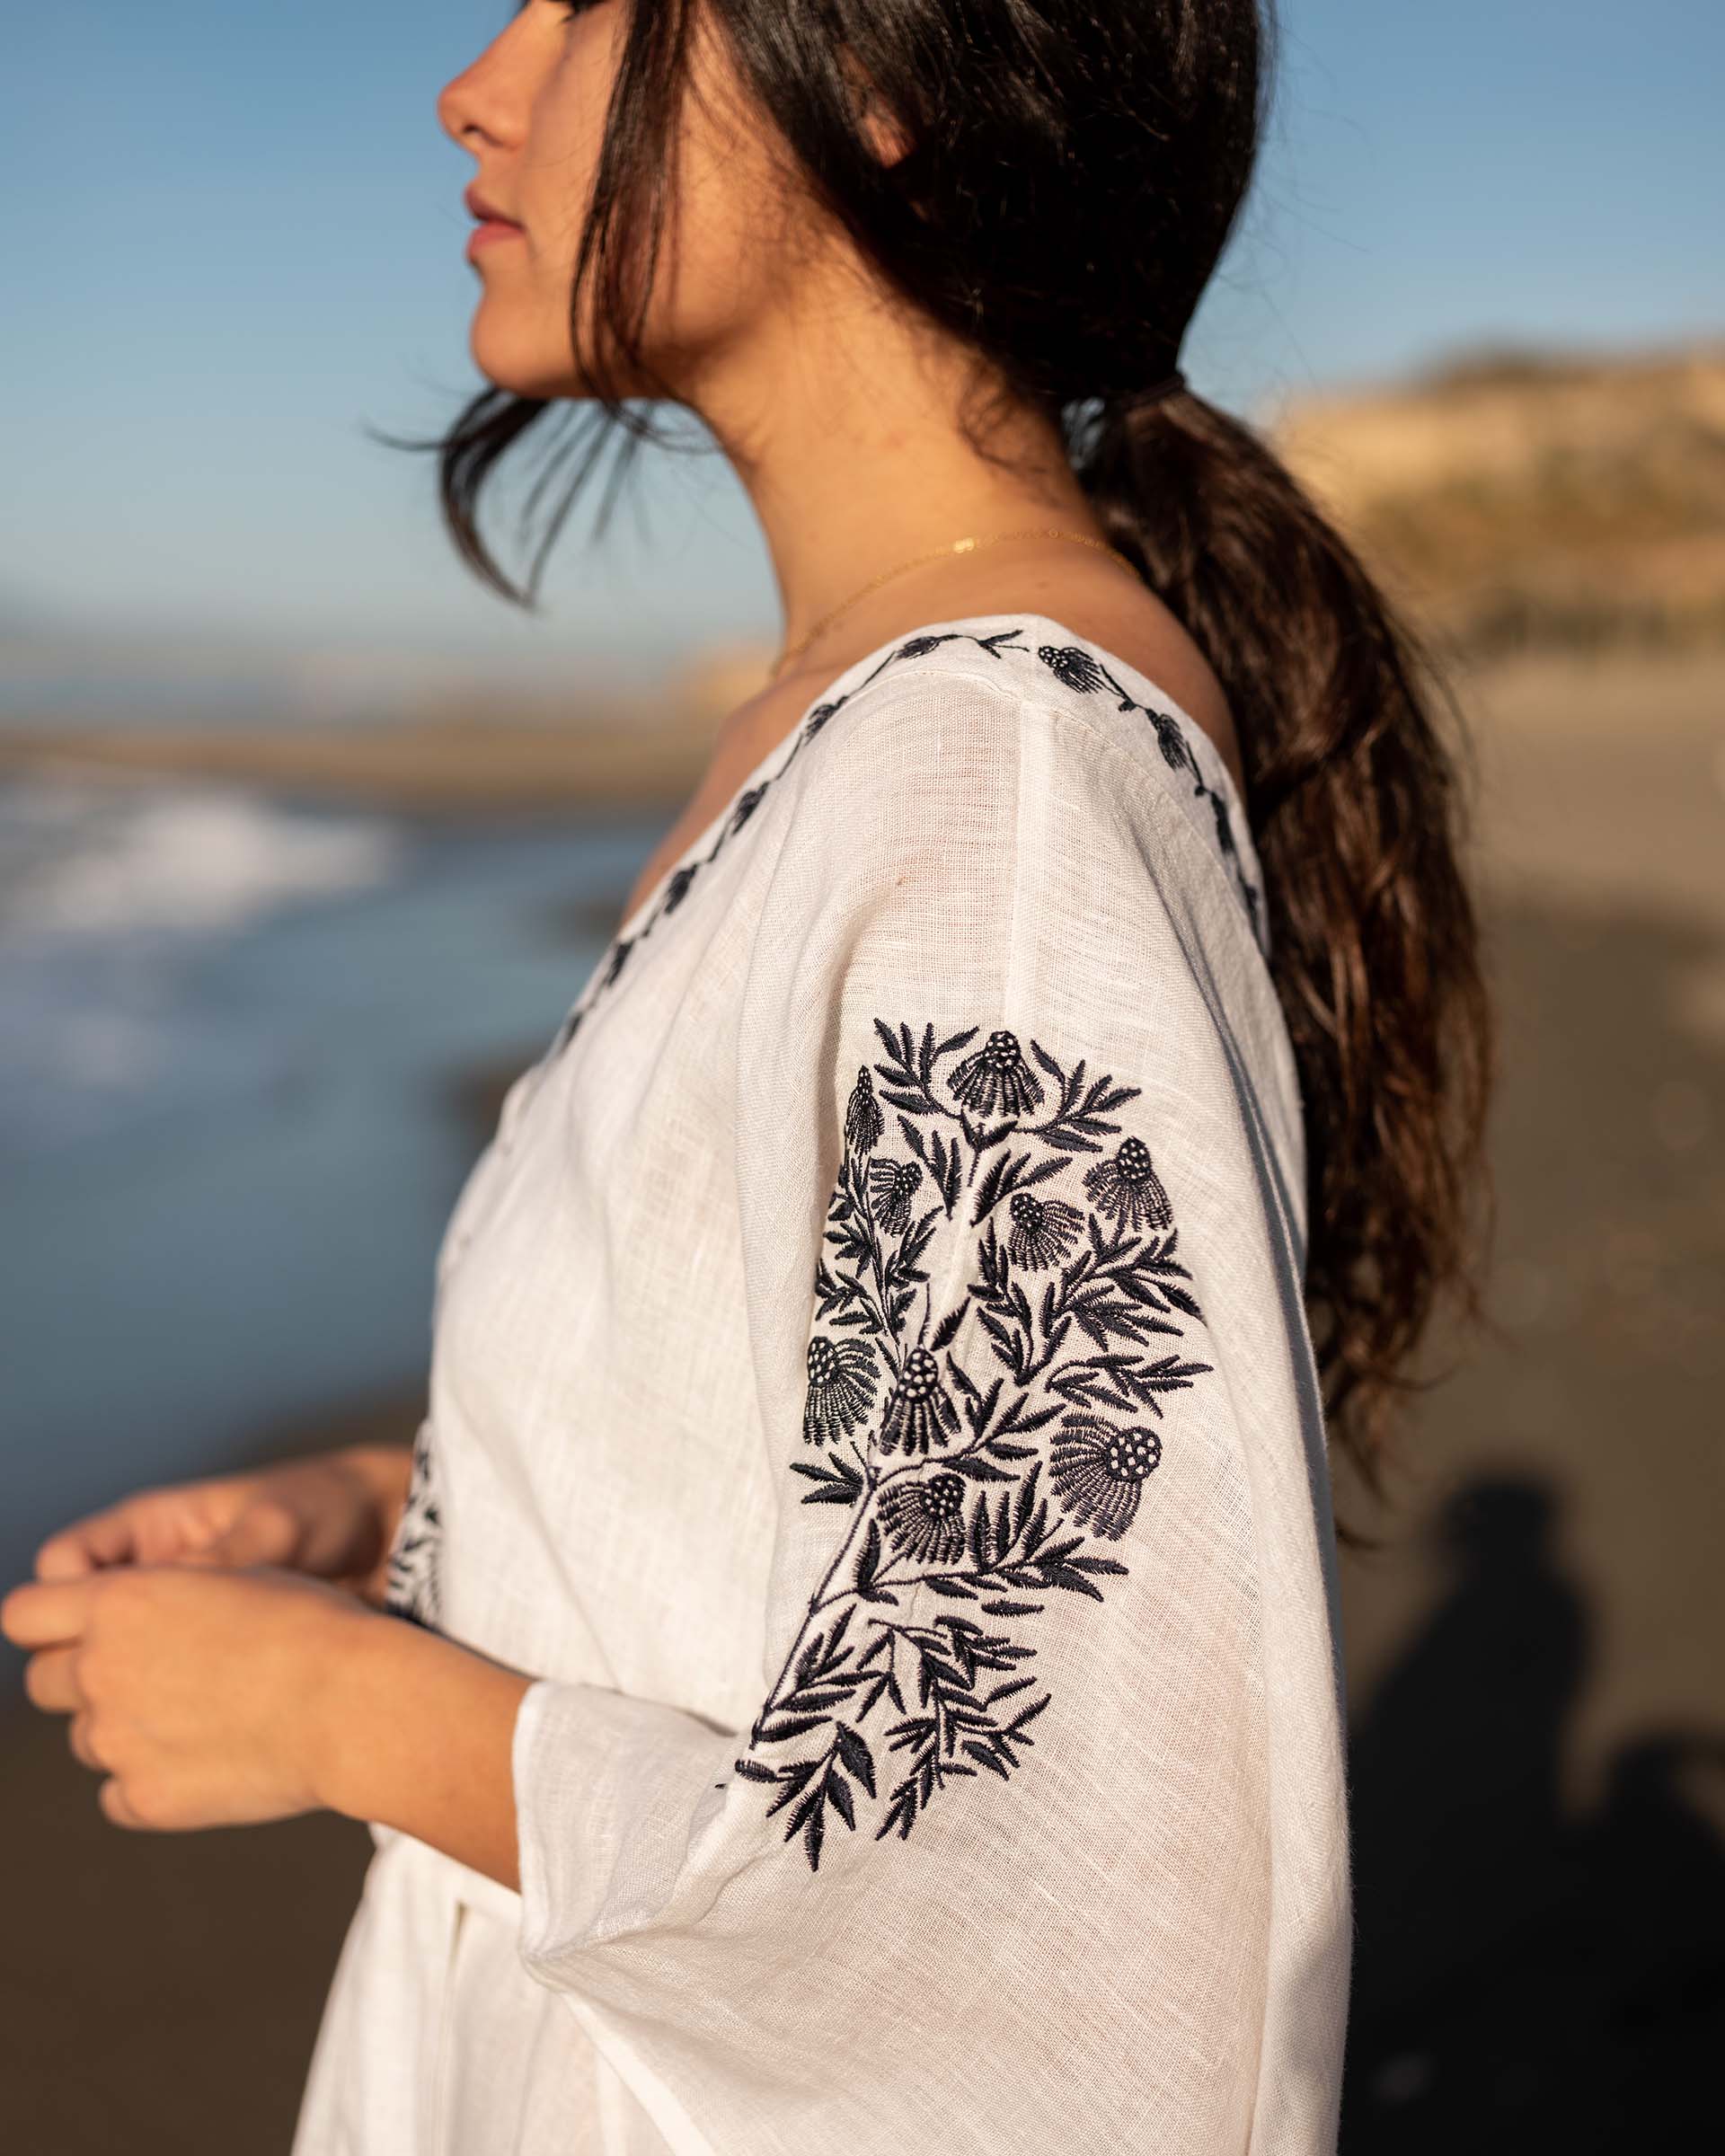 Brown hair female wearing a white embroidered cover up on the beach